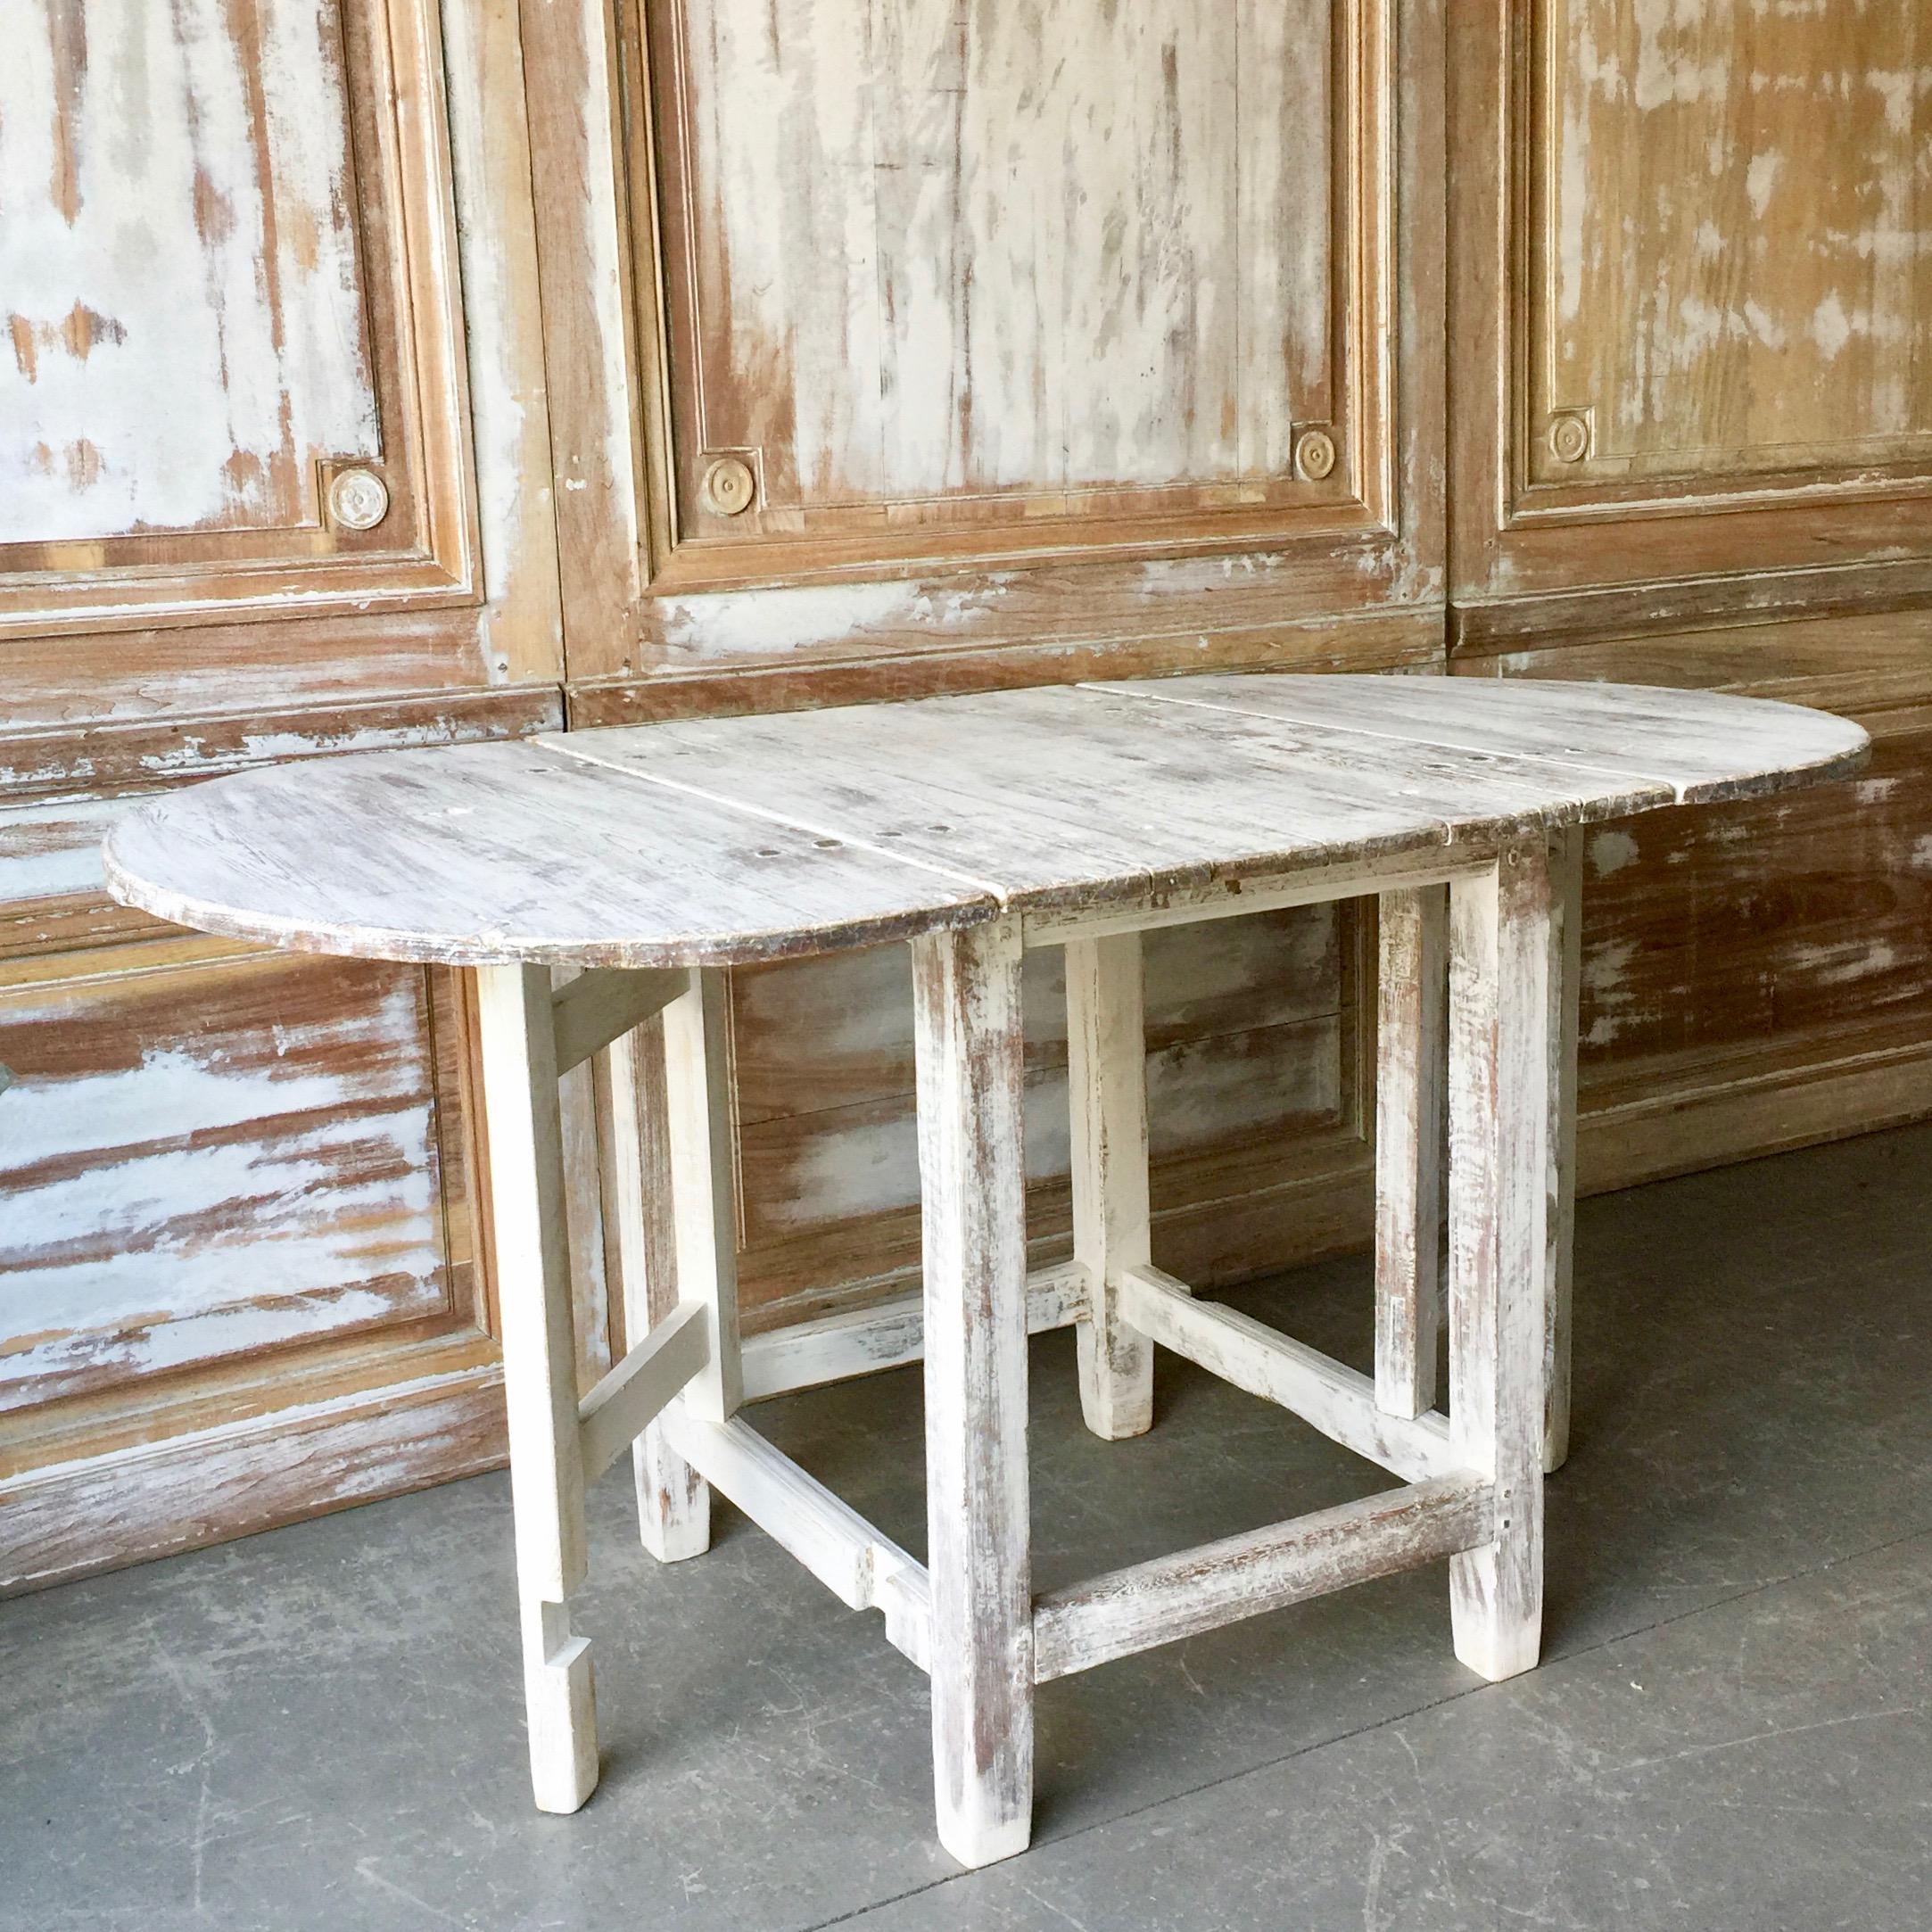 Charming 19th century Swedish painted pine gateleg table with rounded drop-leaves.
Practical for use as a table or with one or both leaves folded down use as a console table.
Each drop-leaf is 18